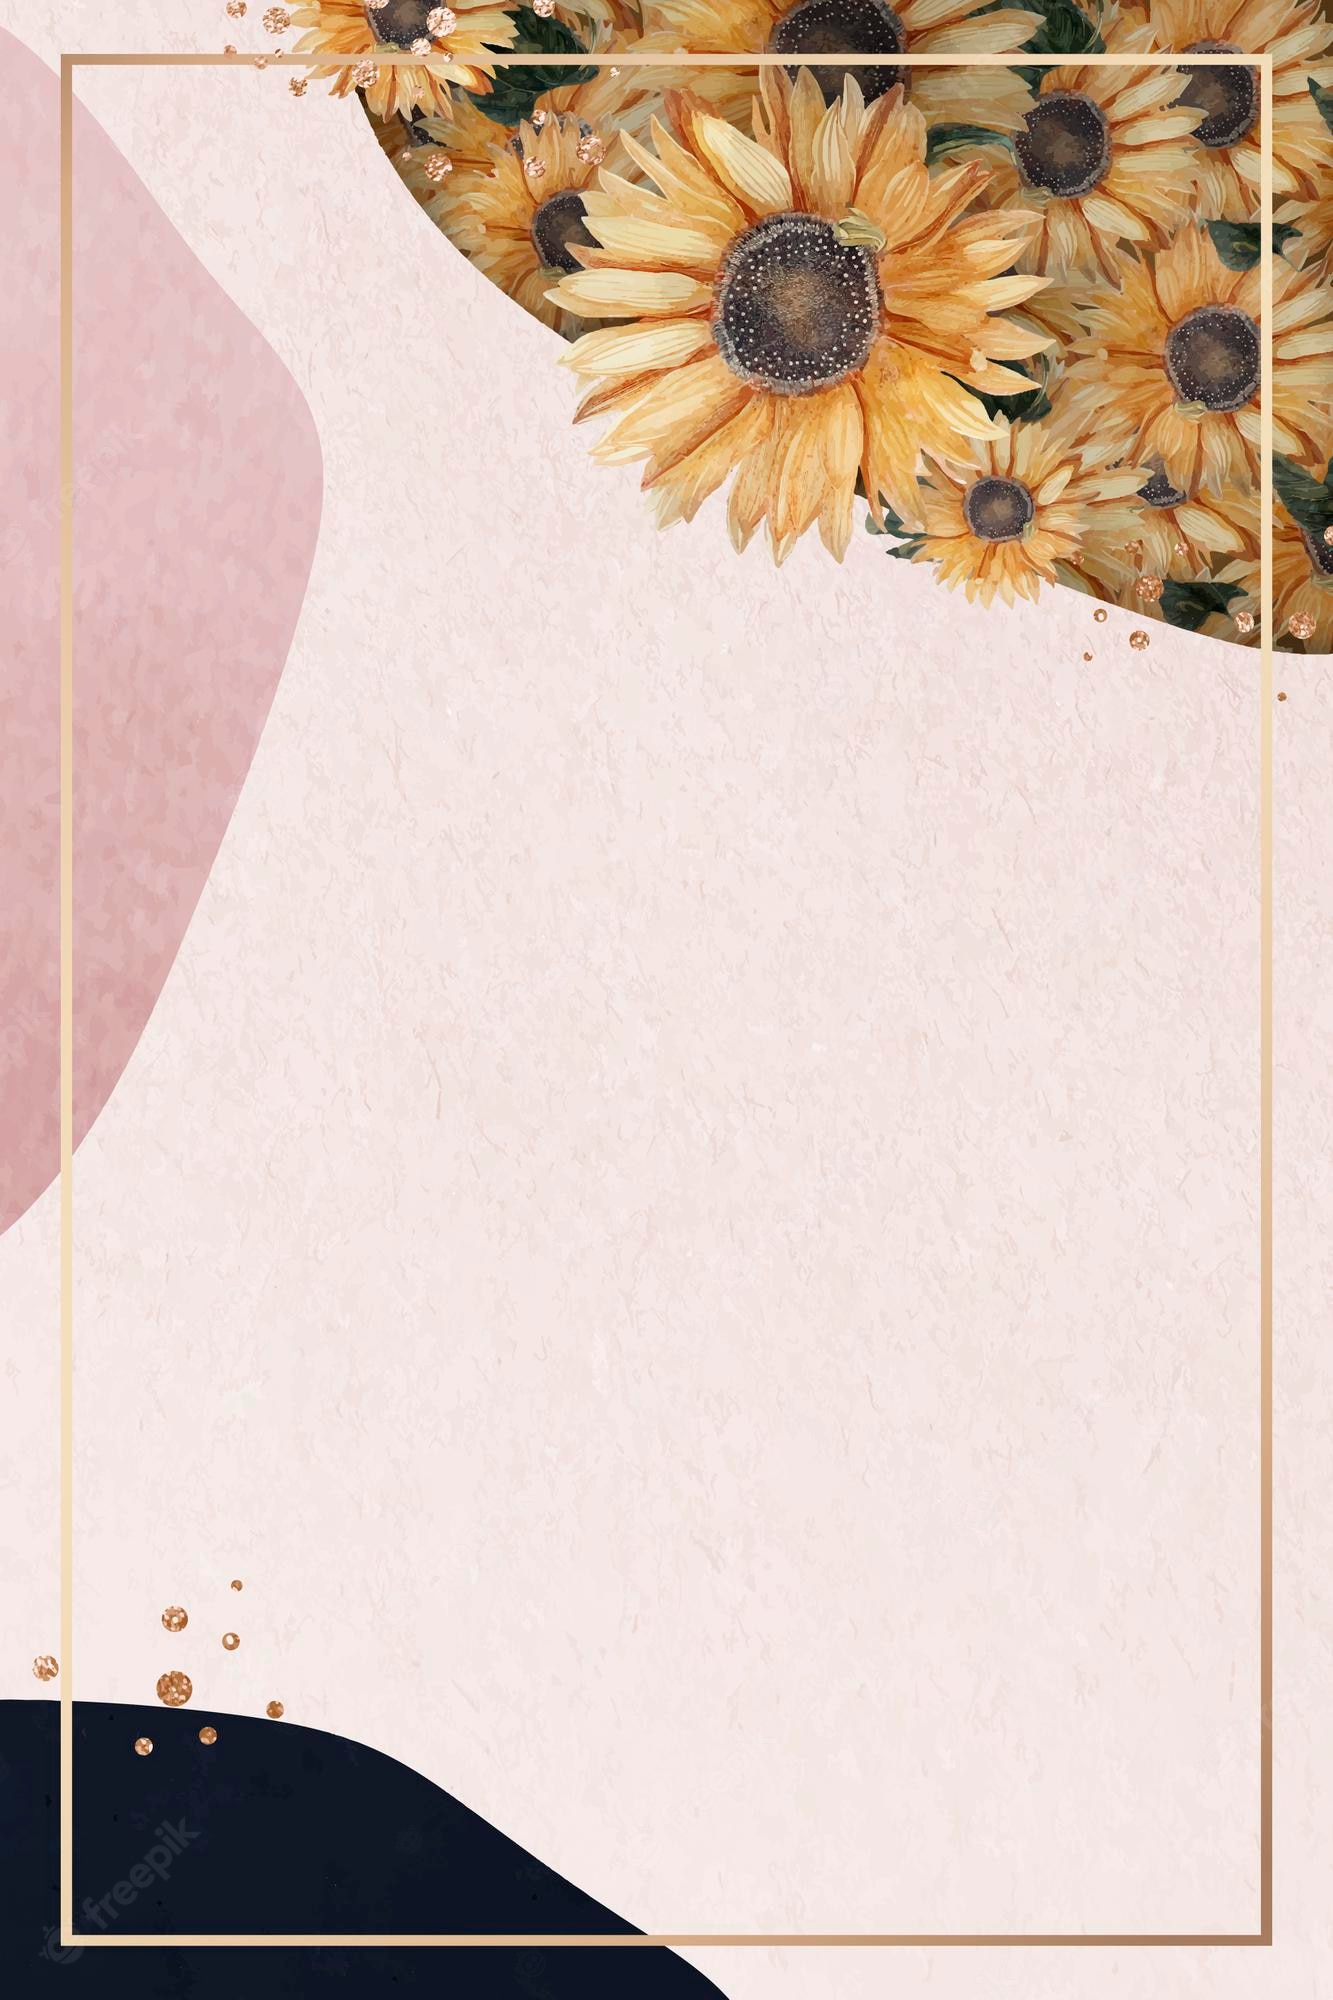 Free Vector. Gold frame on pink collage background with sunflowers